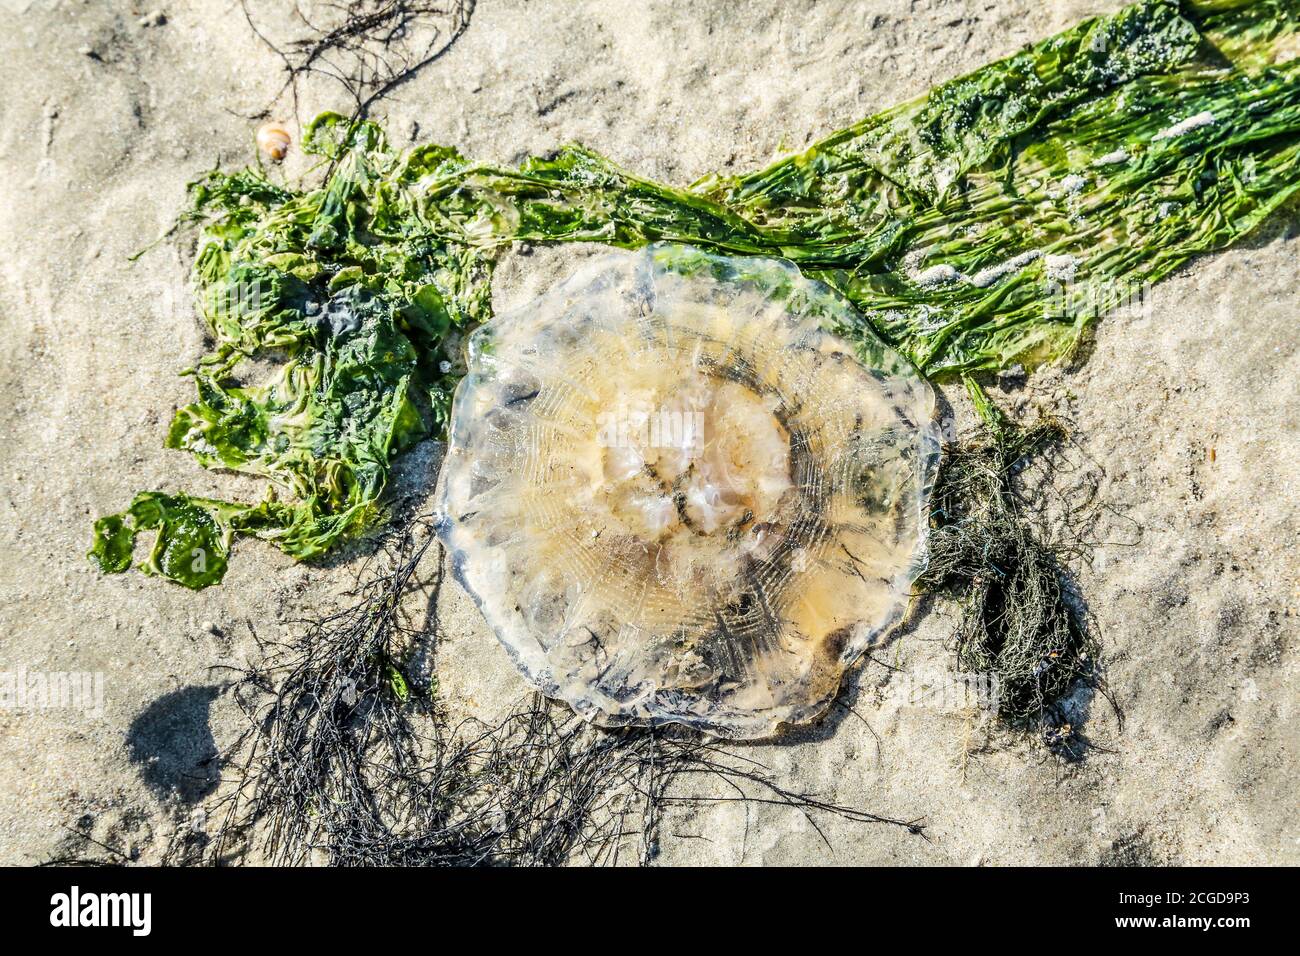 A jellyfish on the beach of the North Sea. Stock Photo